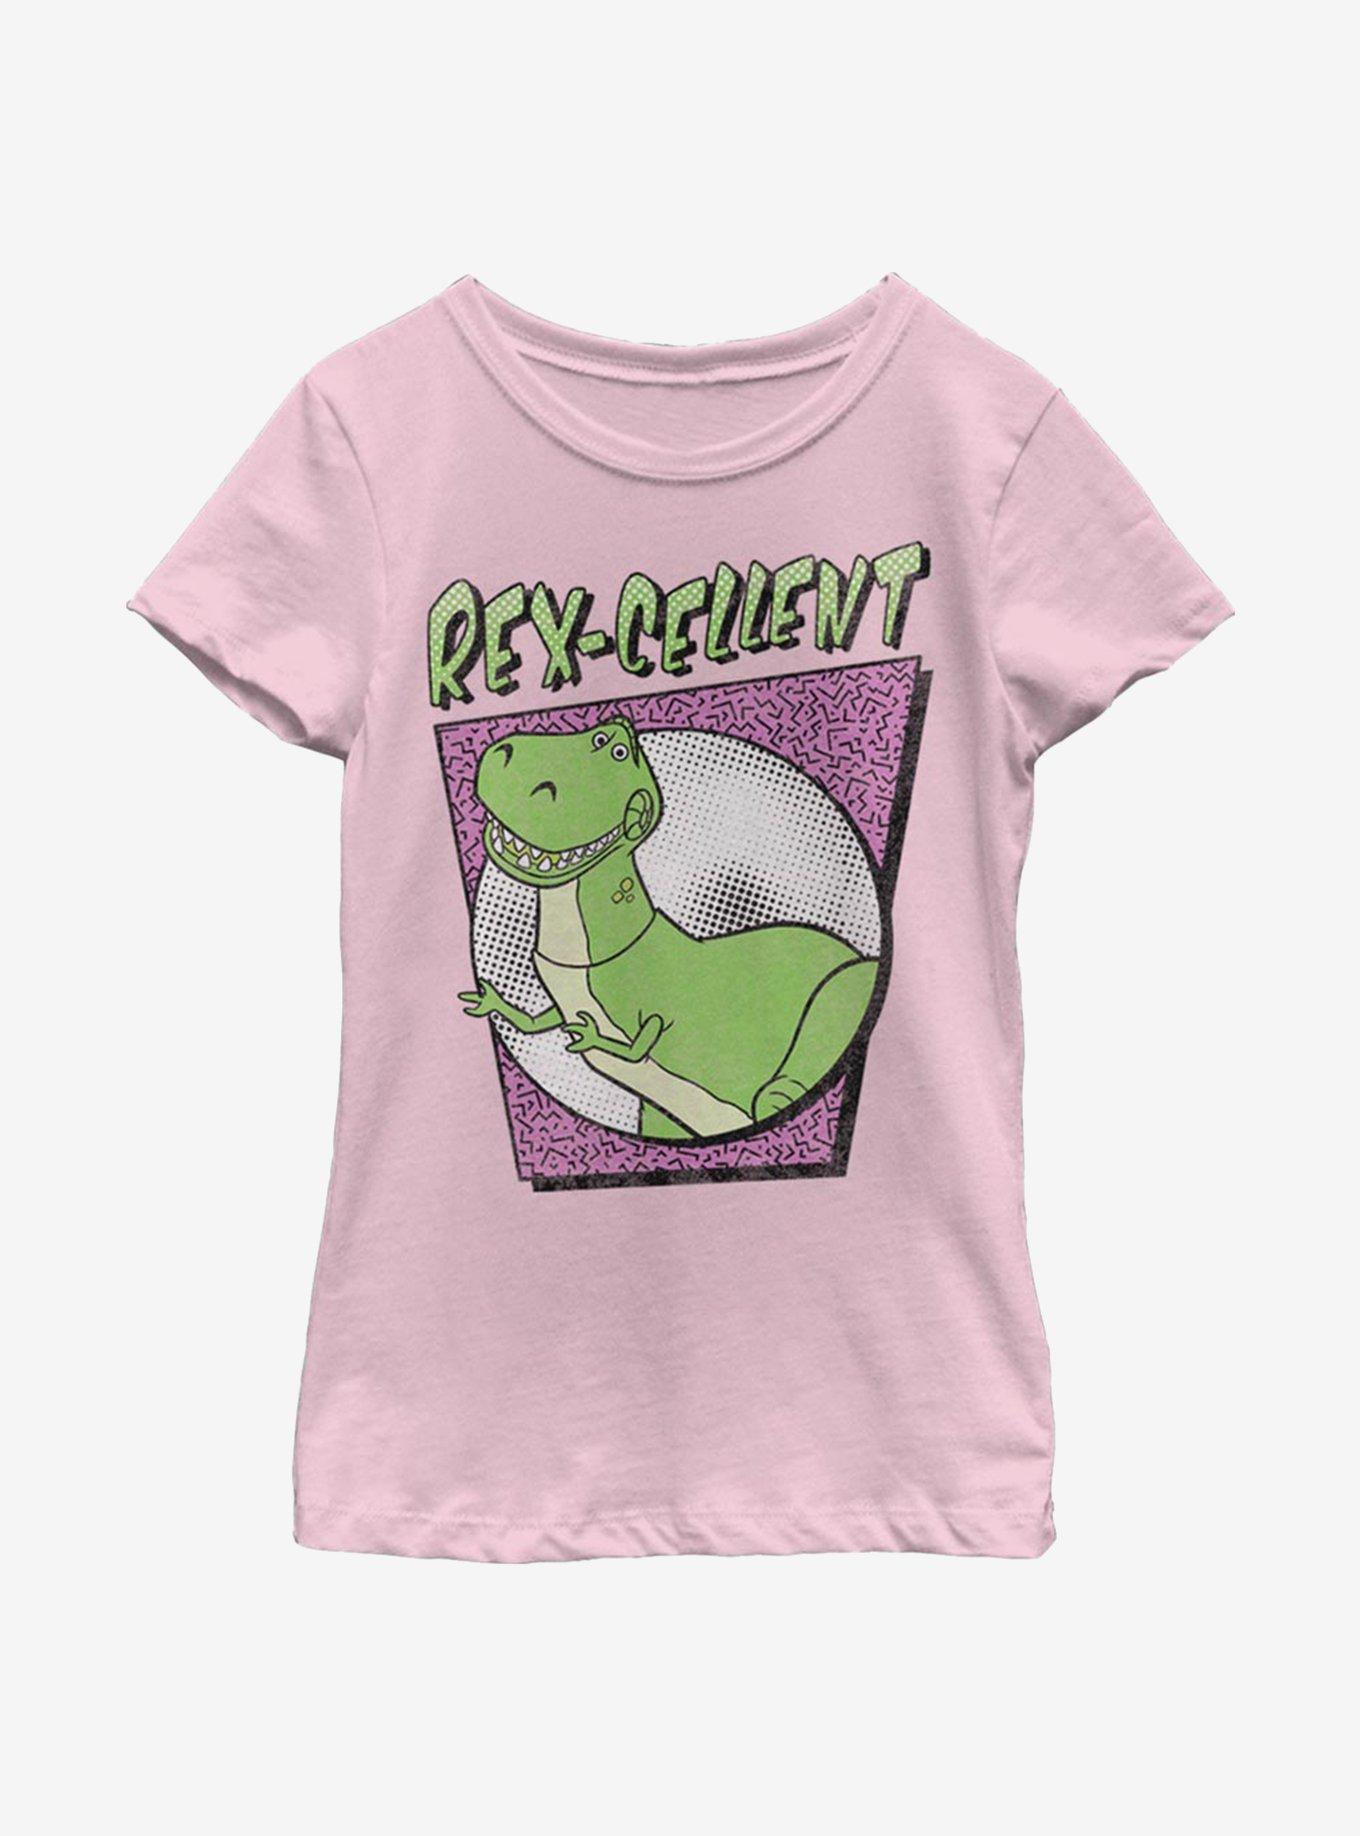 Disney Pixar Toy Story So Excellent Youth Girls T-Shirt, PINK, hi-res